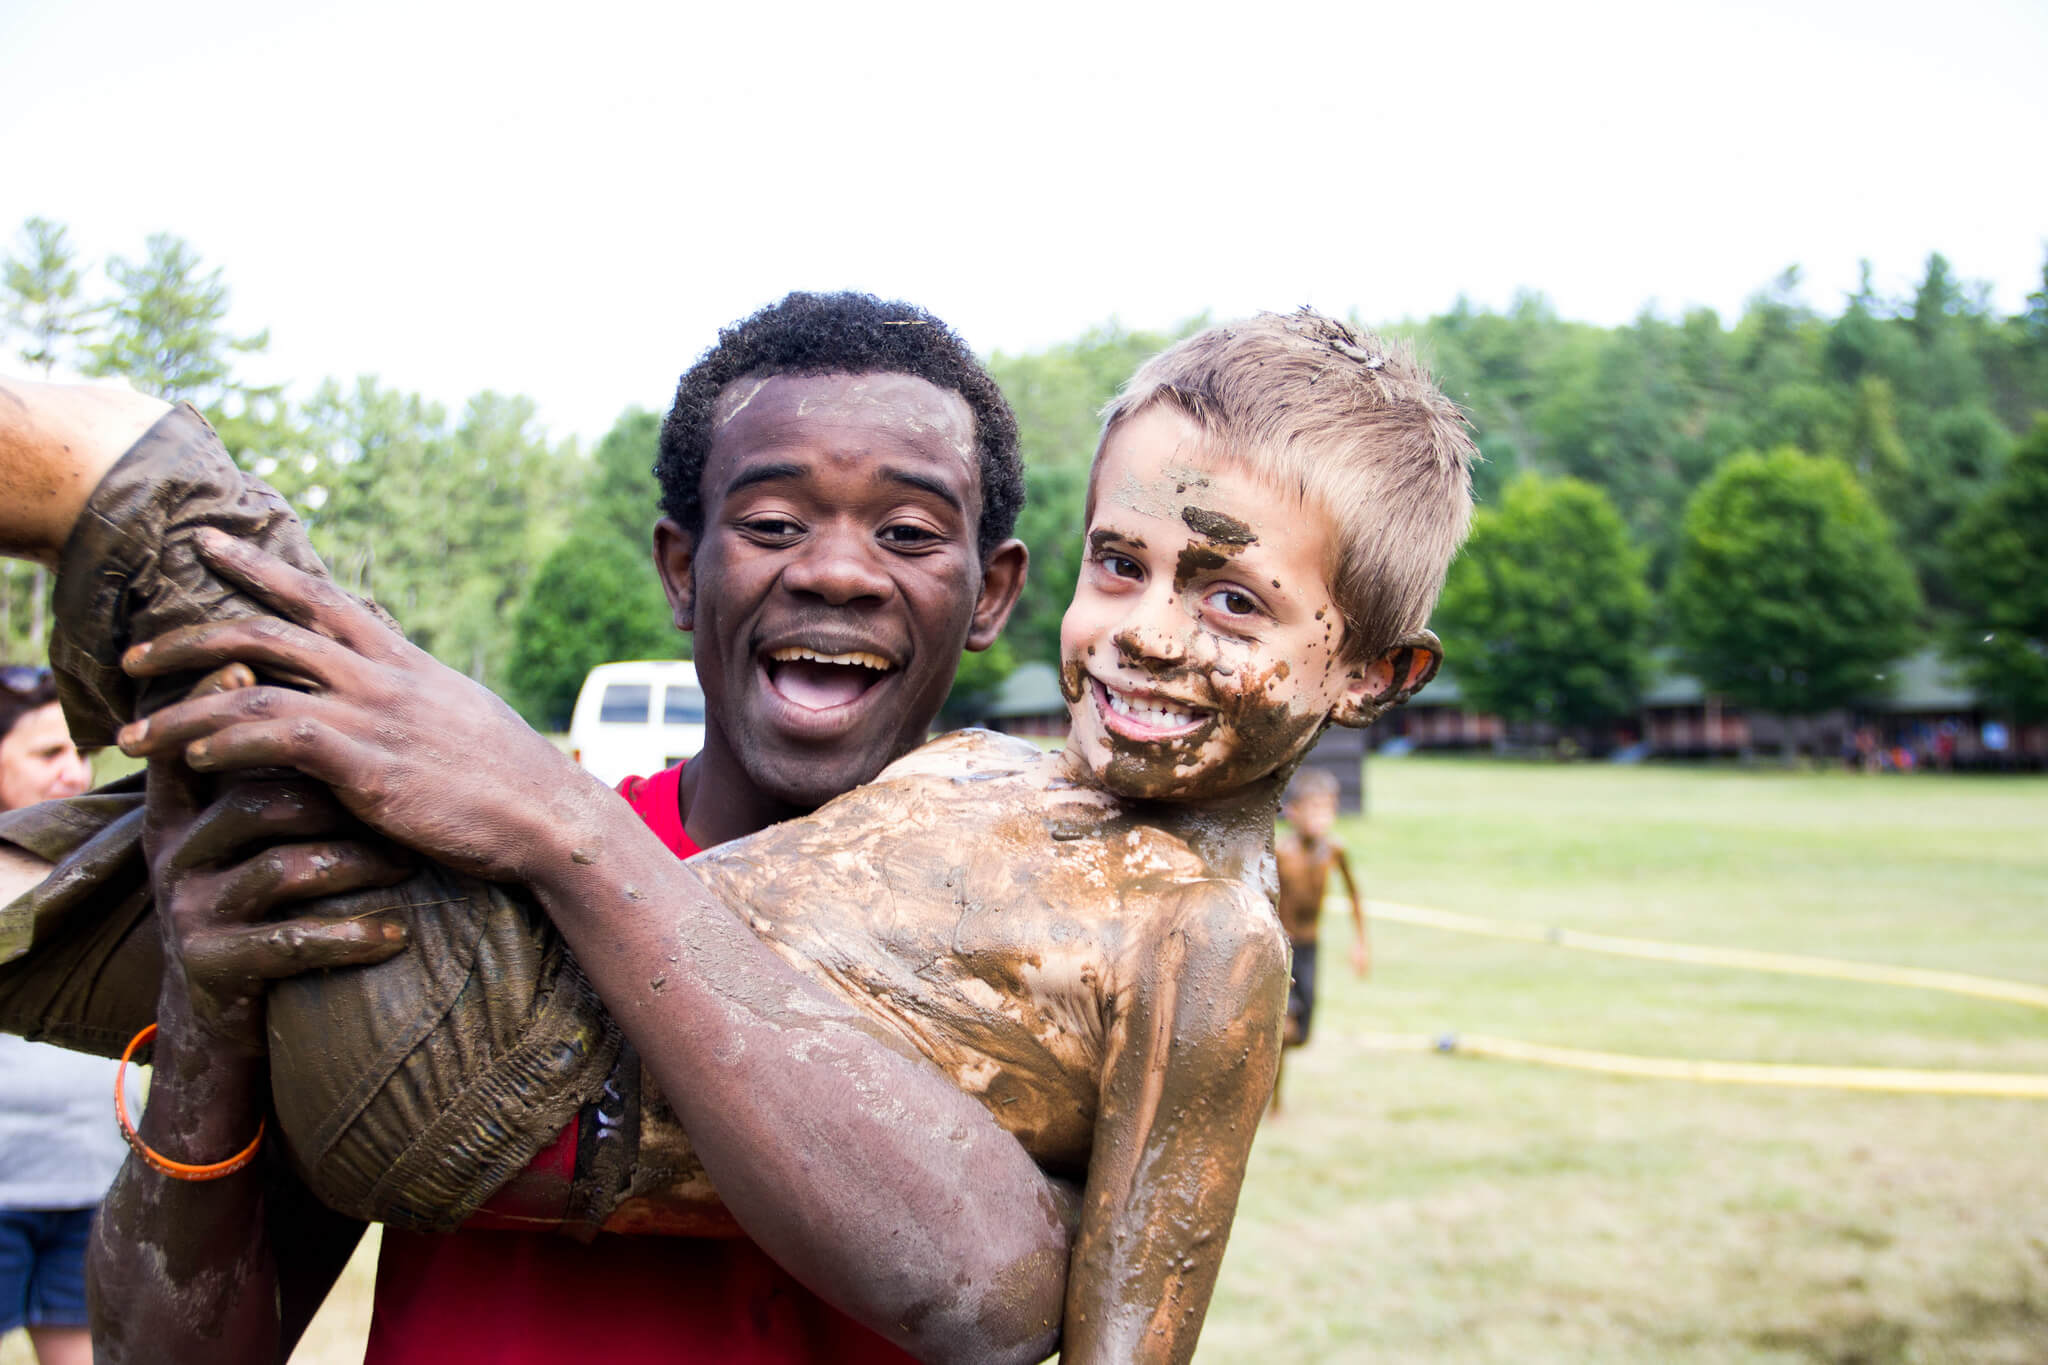 man holding child while covered in mud.